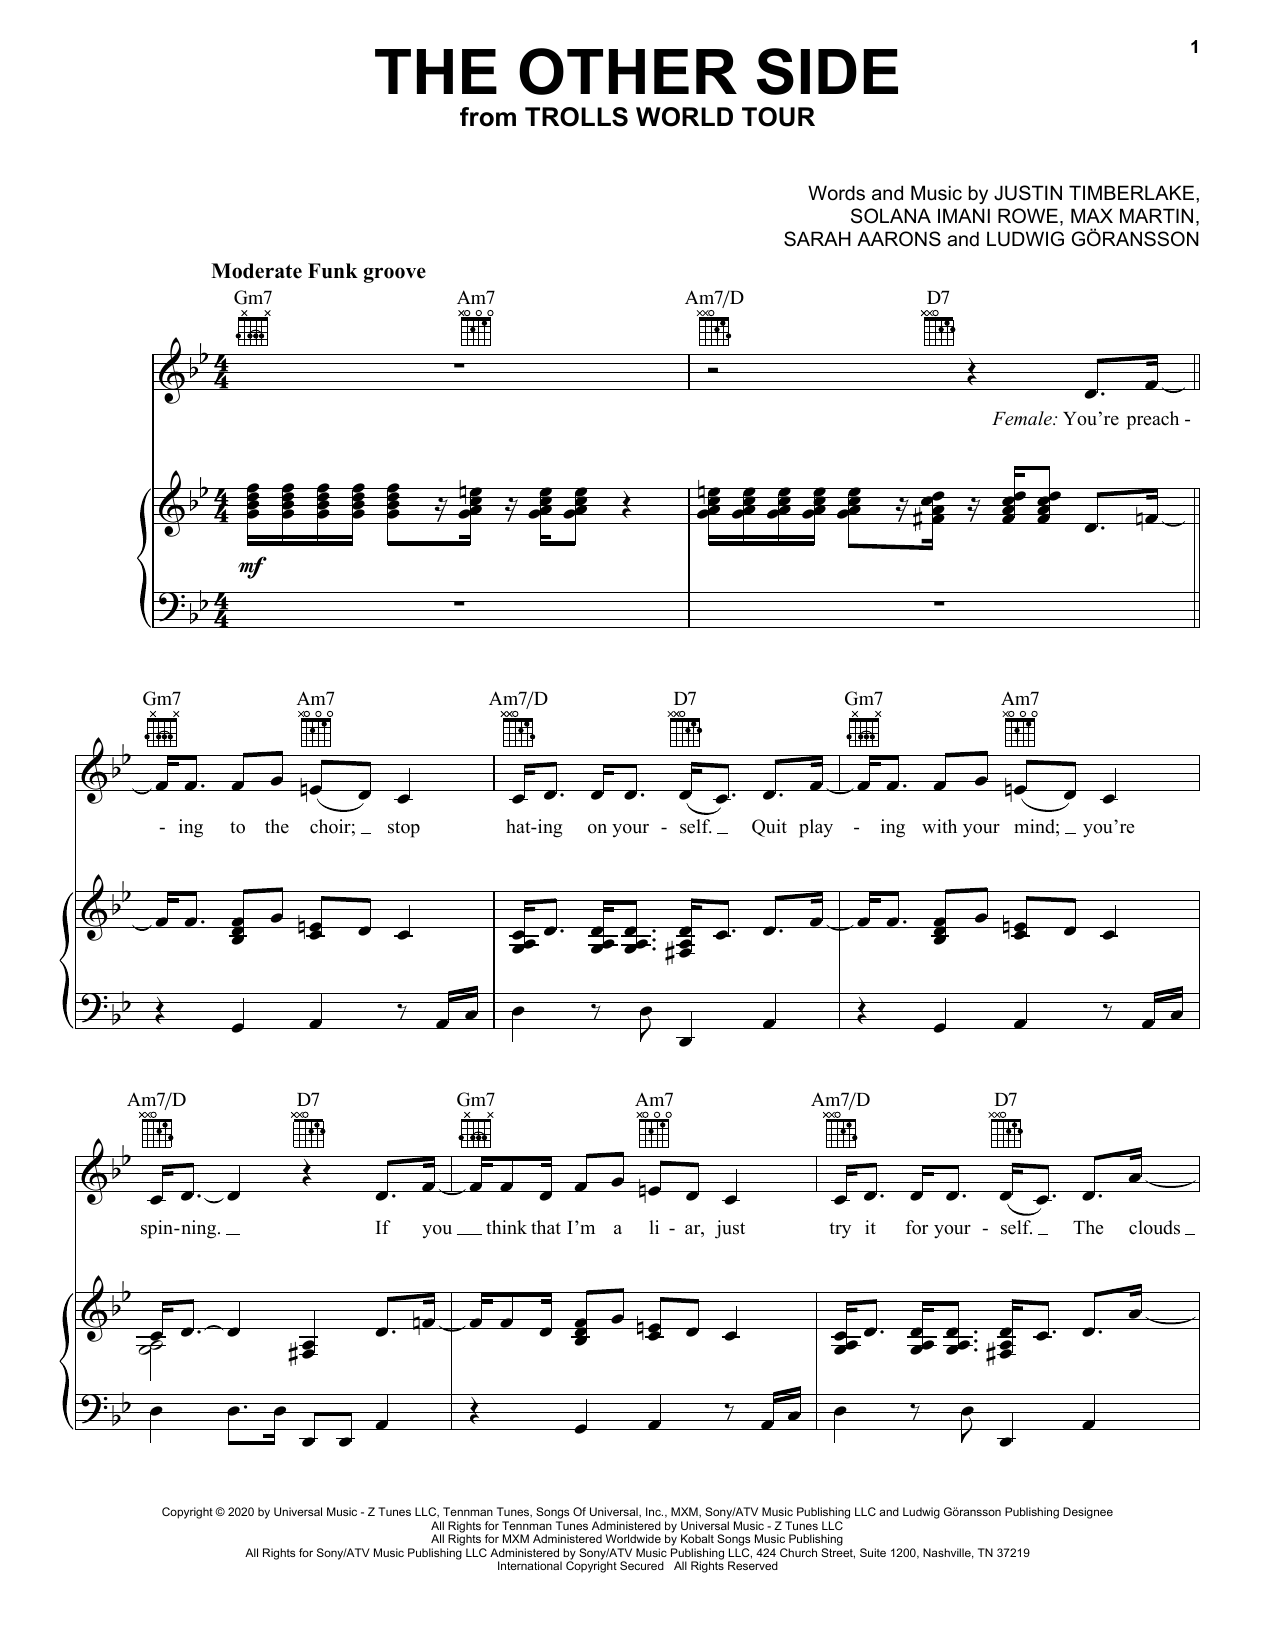 Download SZA & Justin Timberlake The Other Side (from Trolls World Tour) Sheet Music